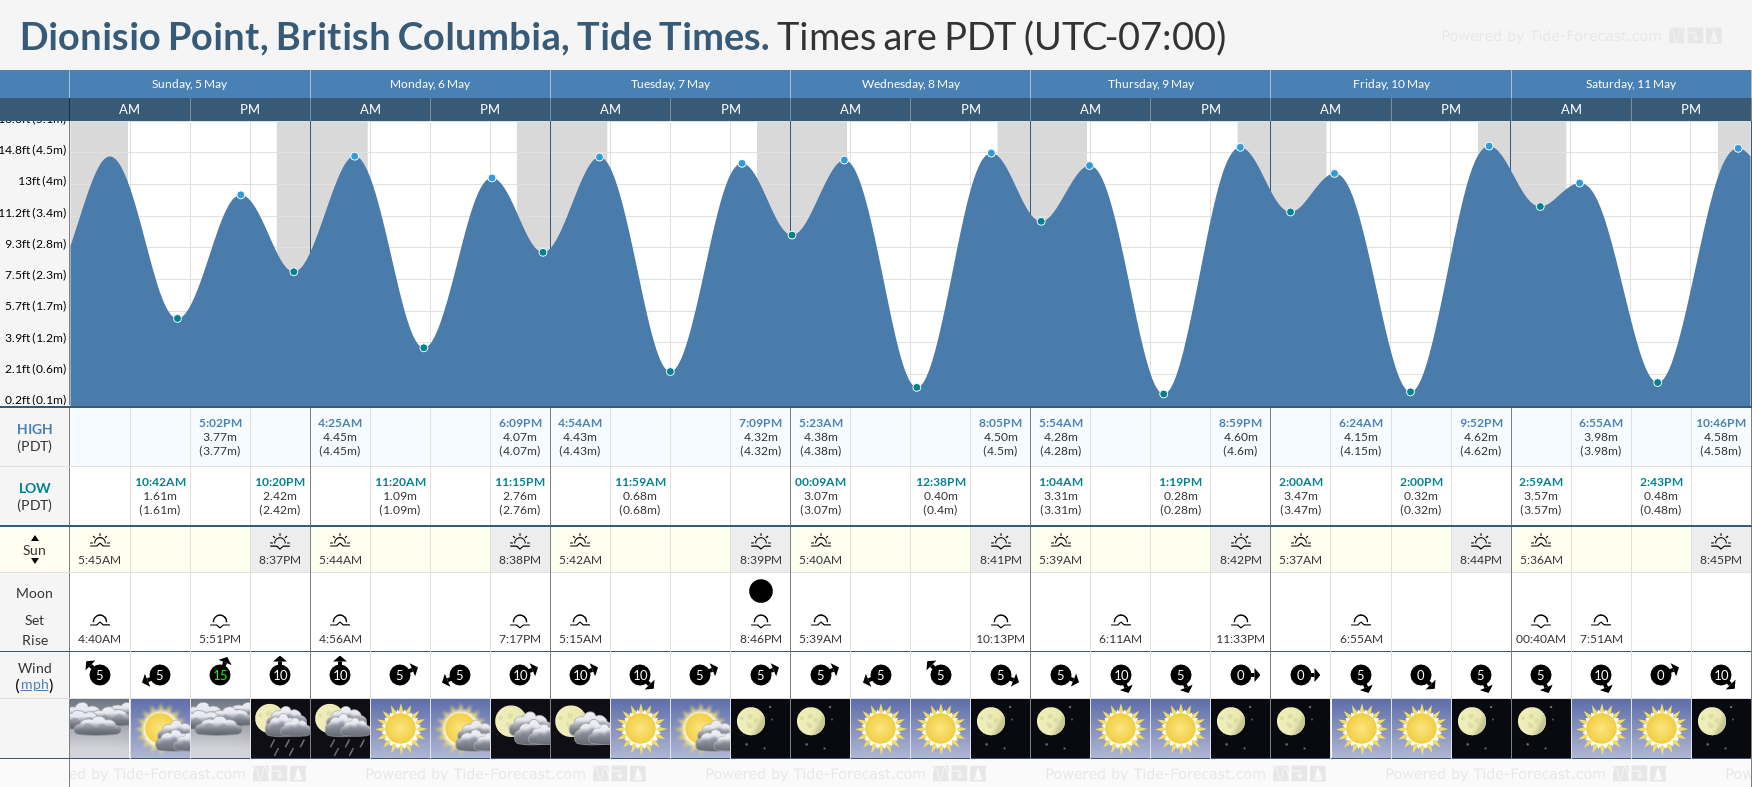 Dionisio Point, British Columbia Tide Chart including high and low tide tide times for the next 7 days